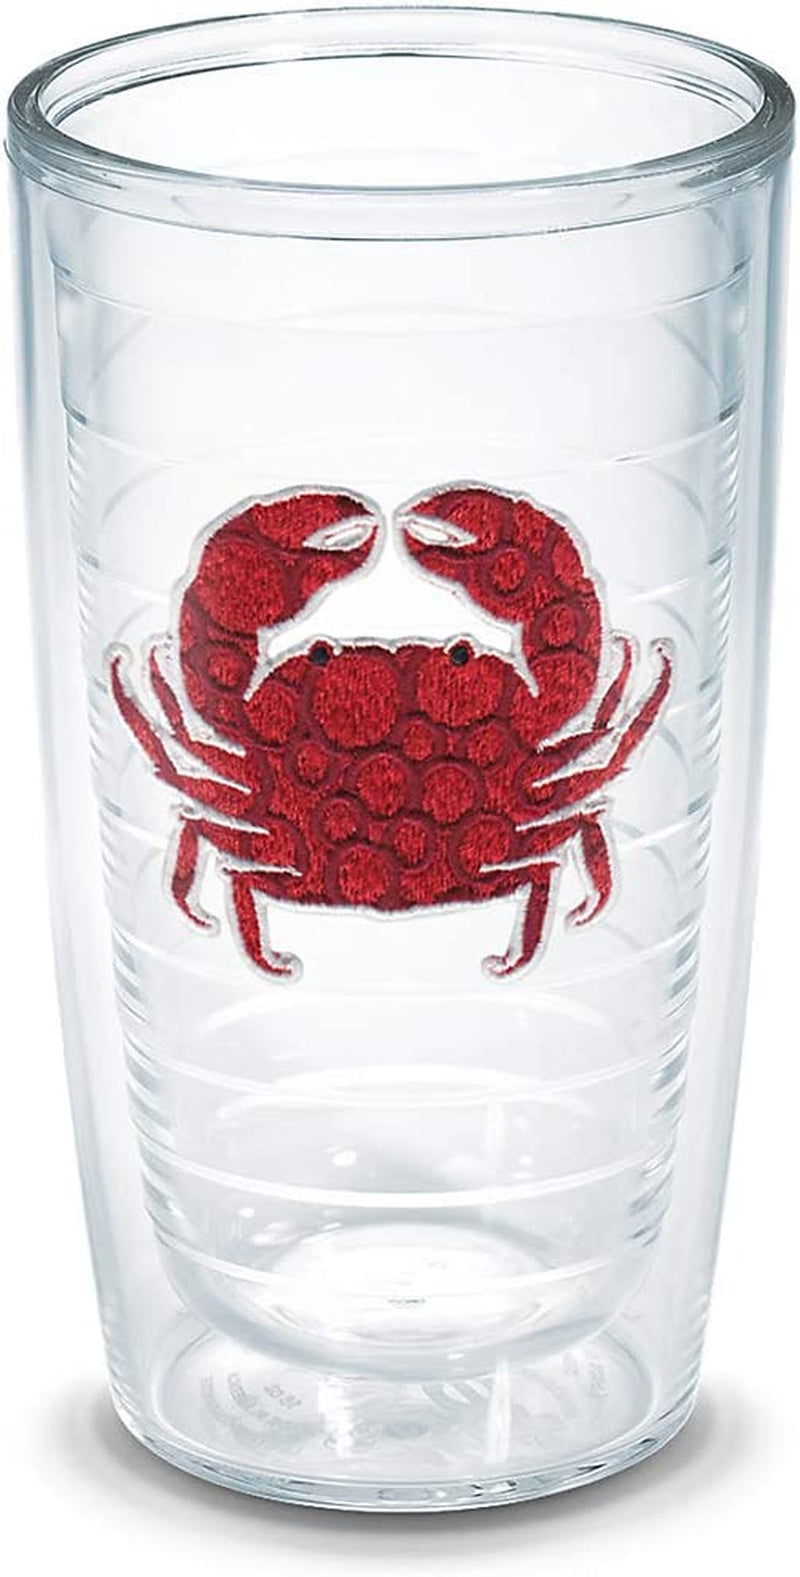 Tervis Crab Insulated Tumbler with Emblem and Red Lid, 16 Oz, Clear